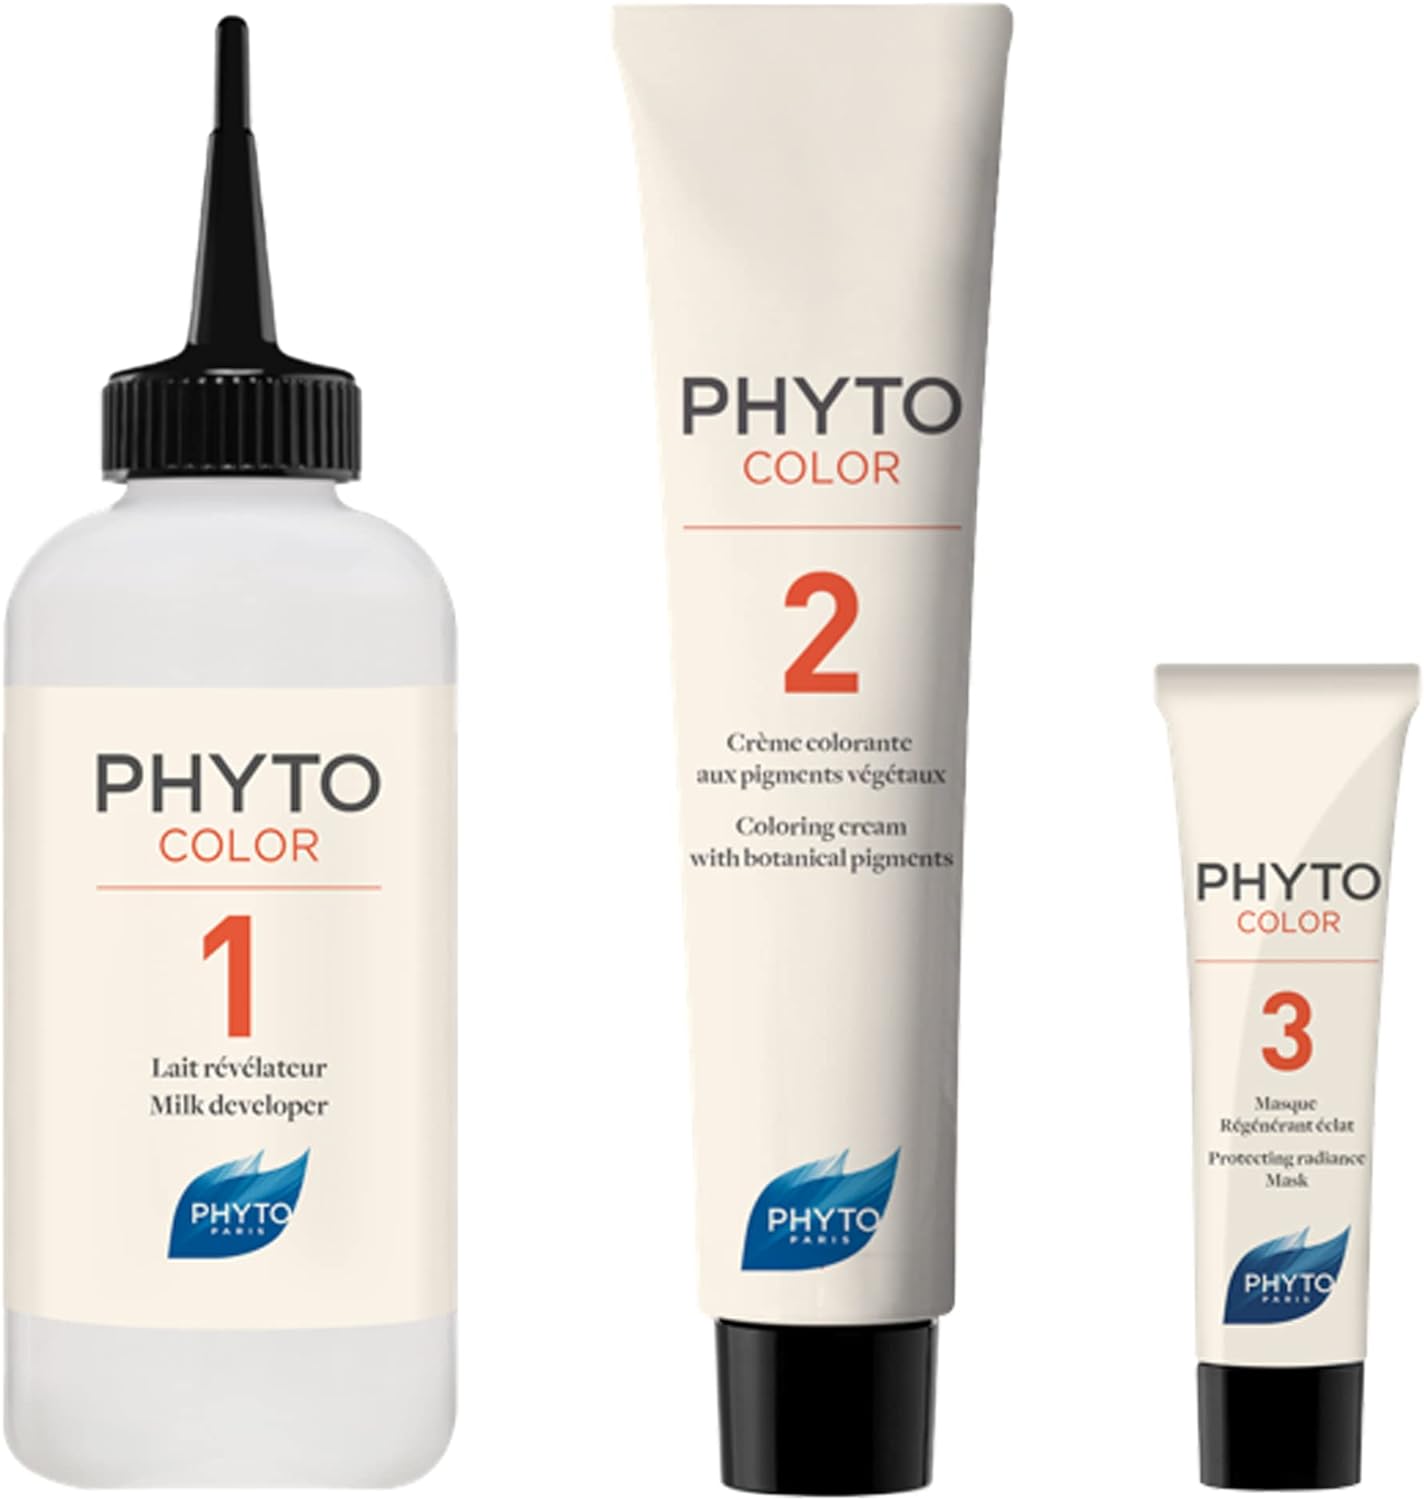 Phyto Phytocolor 7.3